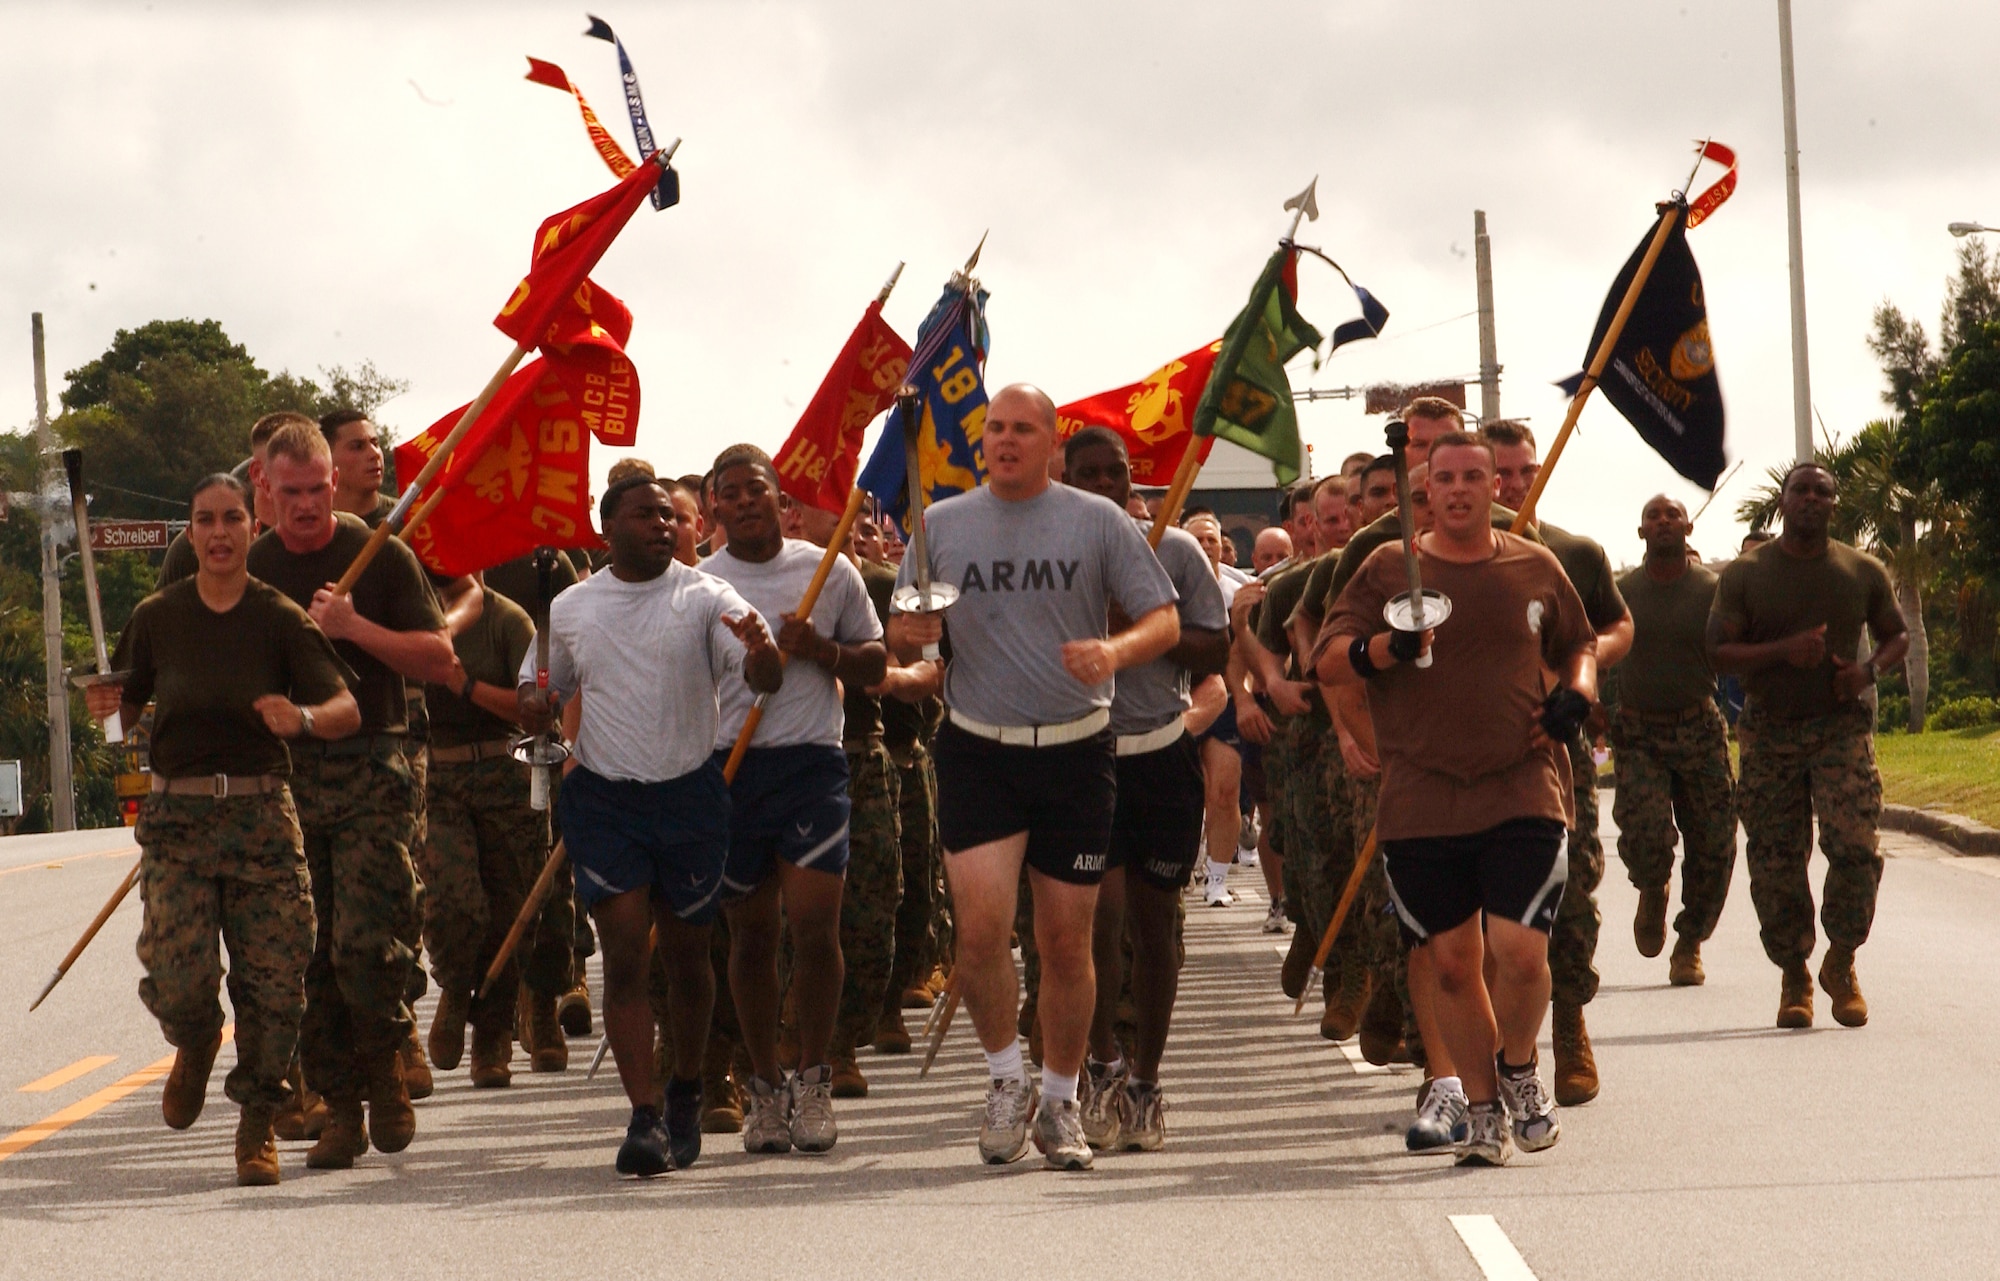 All four services run together for the Law Enforcement Torch Run from Bldg. 705 to the Risner gym at Kadena Air Base, Japan, June 16. The Torch Run is affiliated with Special Olympics nation wide and was adopted at Kadena to promote awareness for the annual event here. (U.S. Air Force photo by Staff Sgt. Reynaldo Ramon)